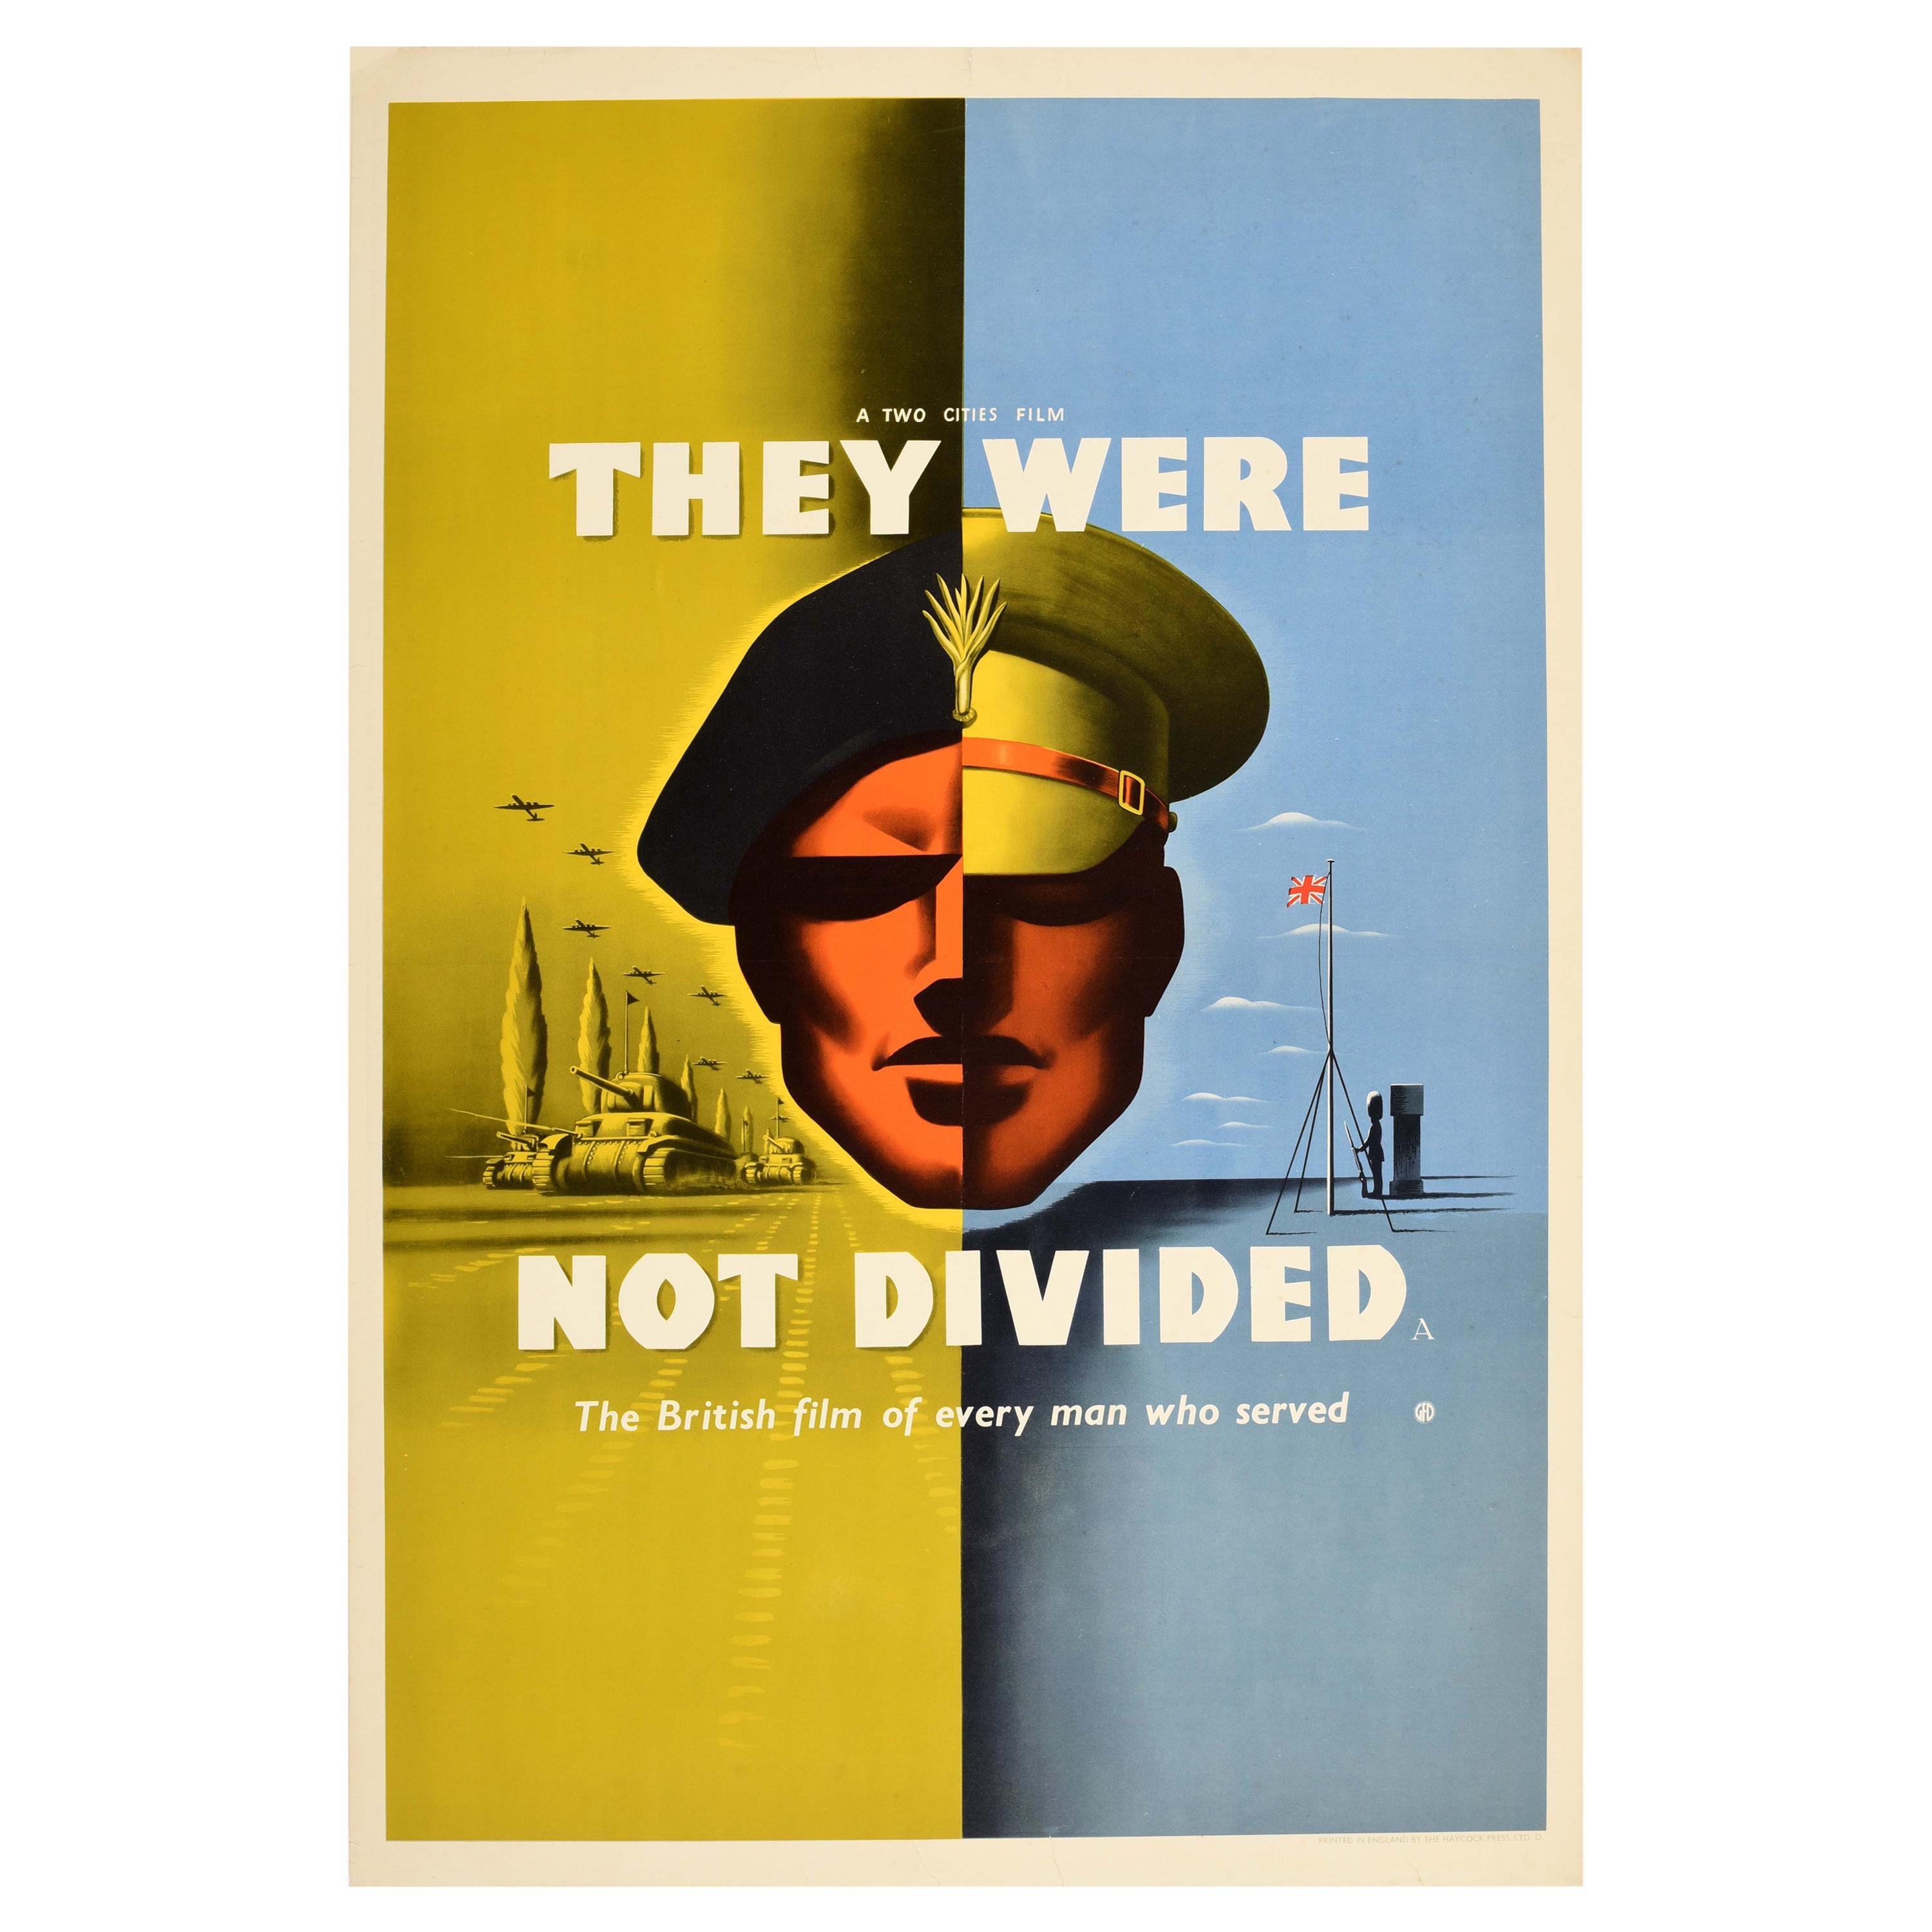 Original Vintage WWII Film Poster They Were Not Divided Tank Division Modernism For Sale